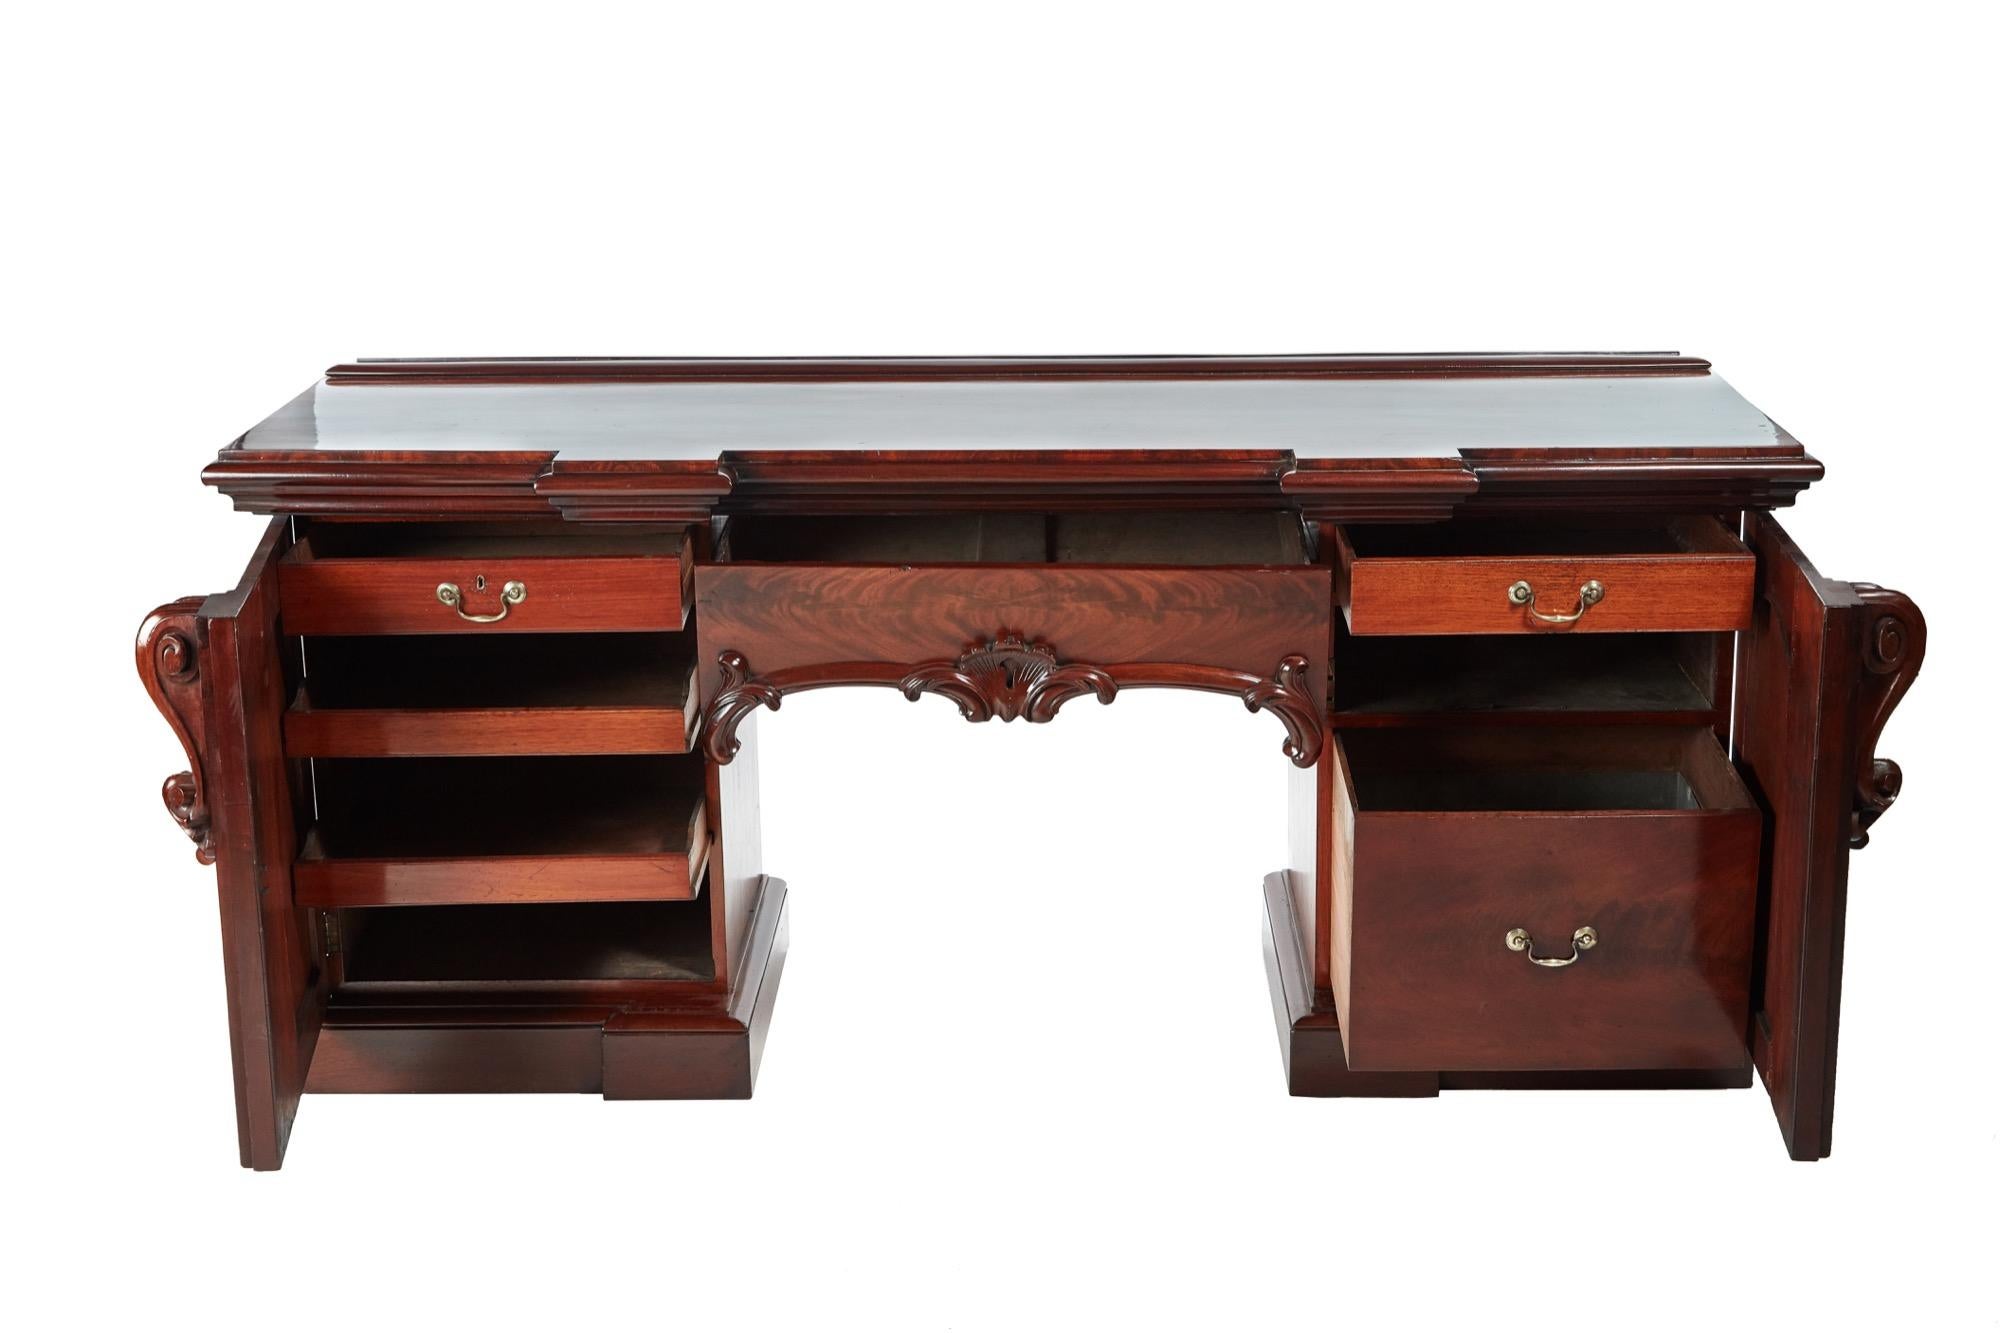 
Fantastic quality antique Victorian antique carved mahogany sideboard with a fantastic quality mahogany top, one carved centre drawer supported by two pedestals with carved doors and a fitted interior. It stands on a plinth base.

A magnificent